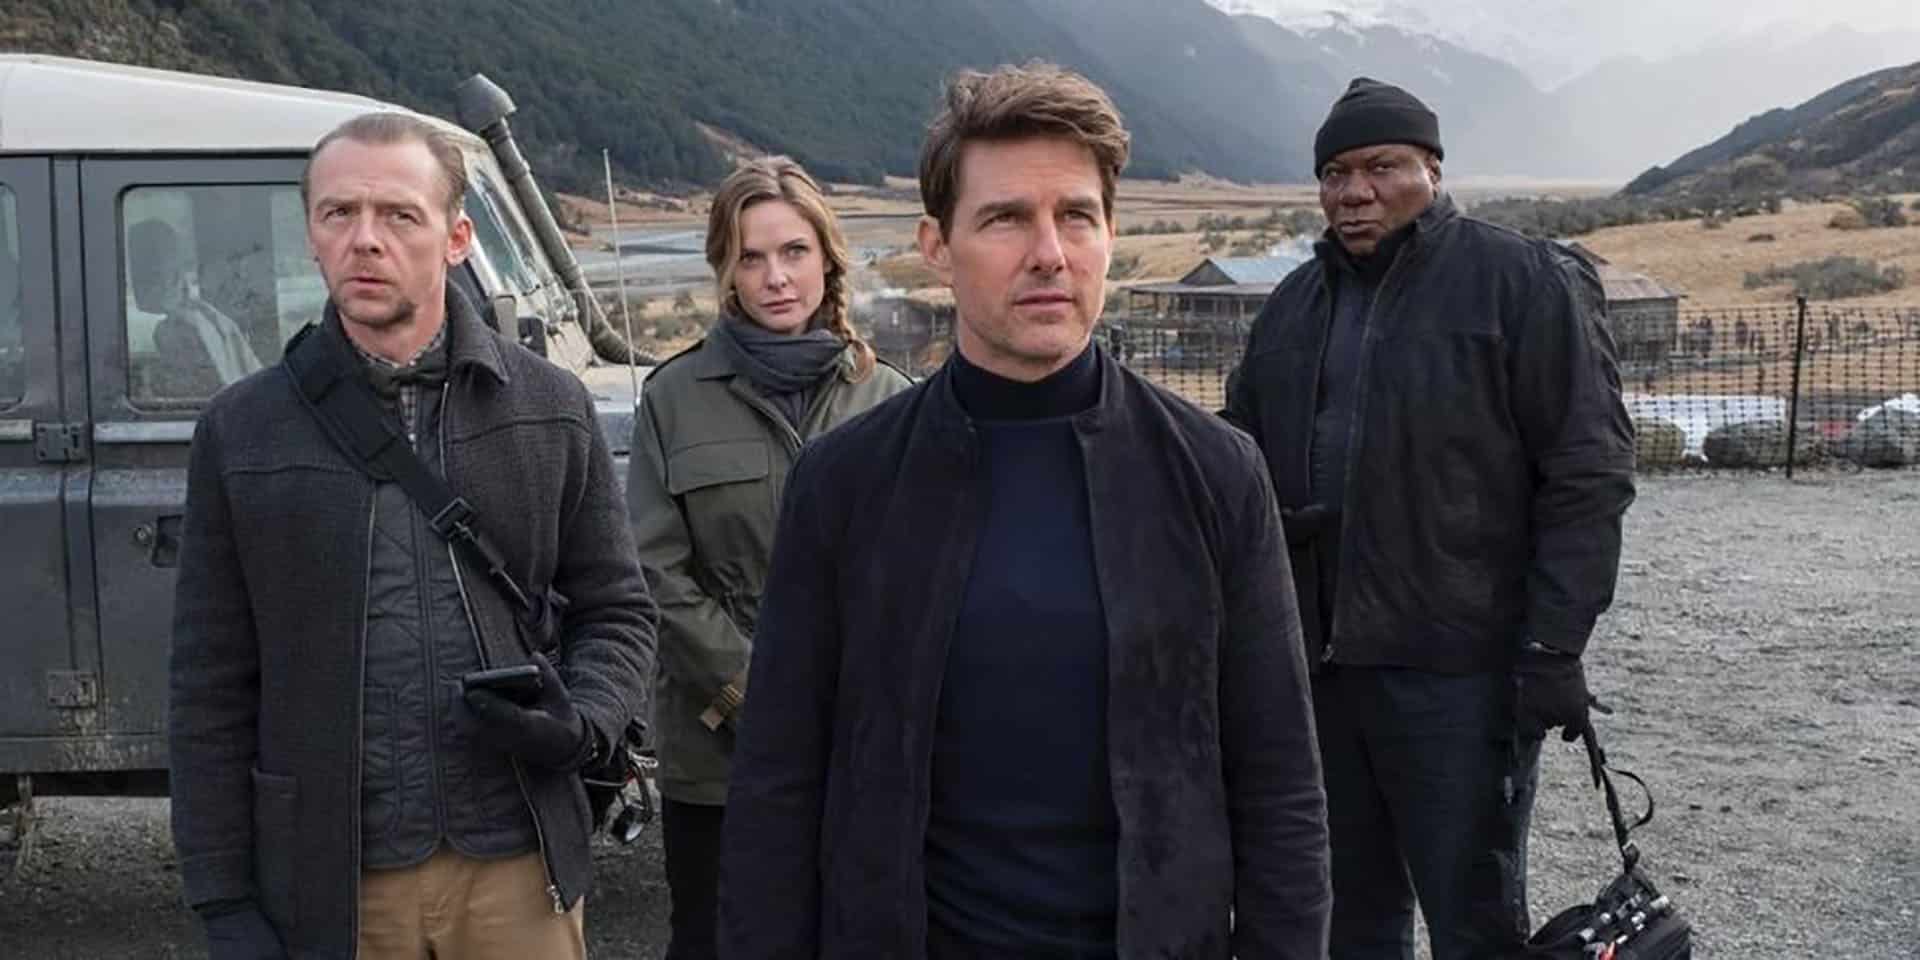 Mission: Impossible – Fallout: tantissime immagini in HD dell’action con Tom Cruise!